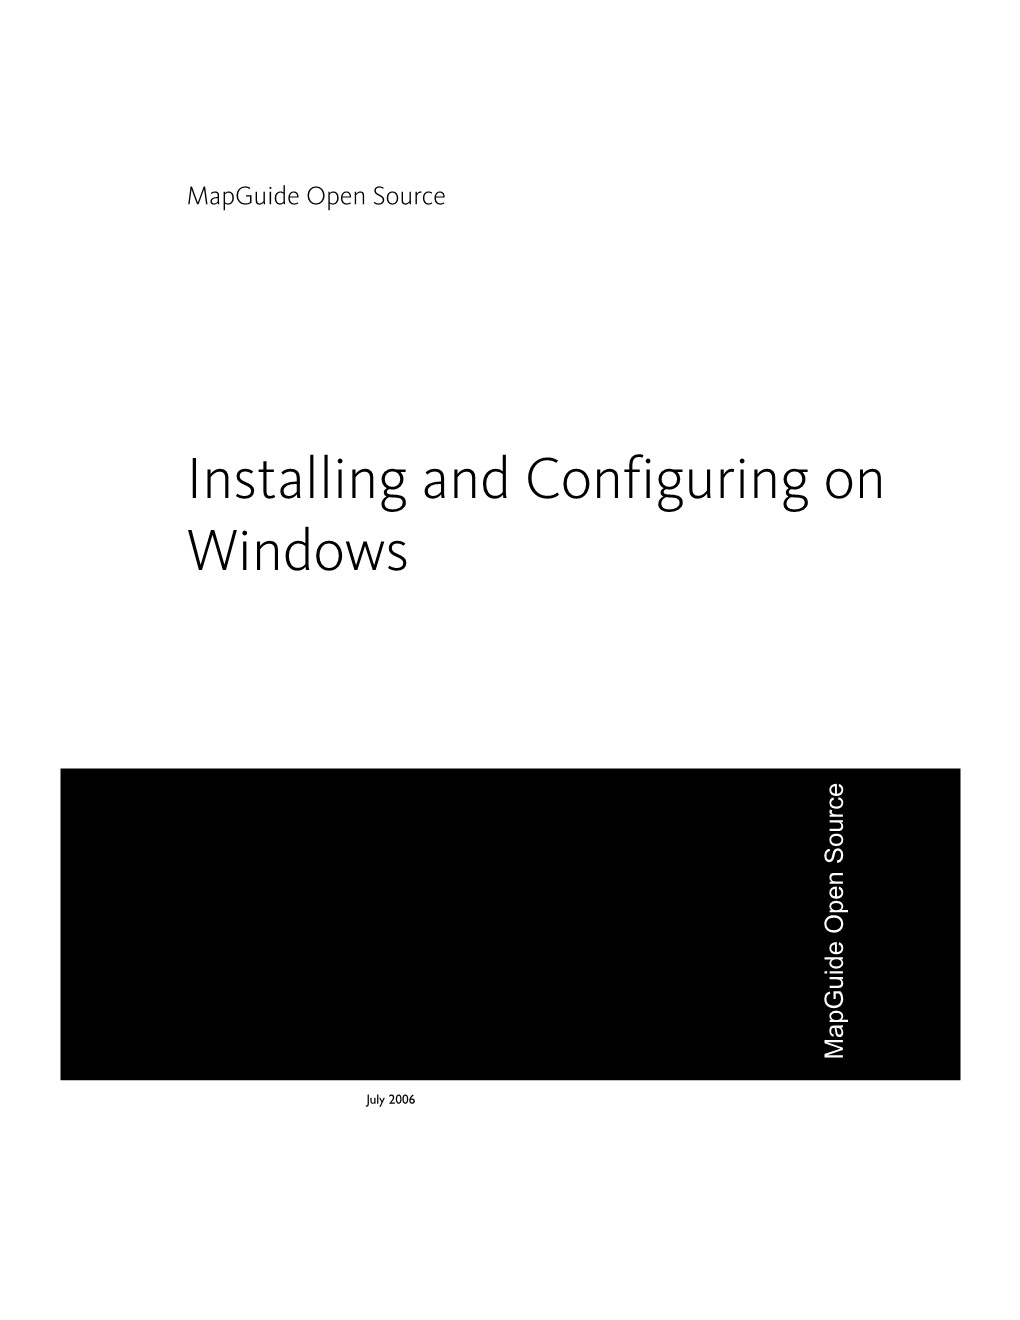 Installing and Configuring on Windows